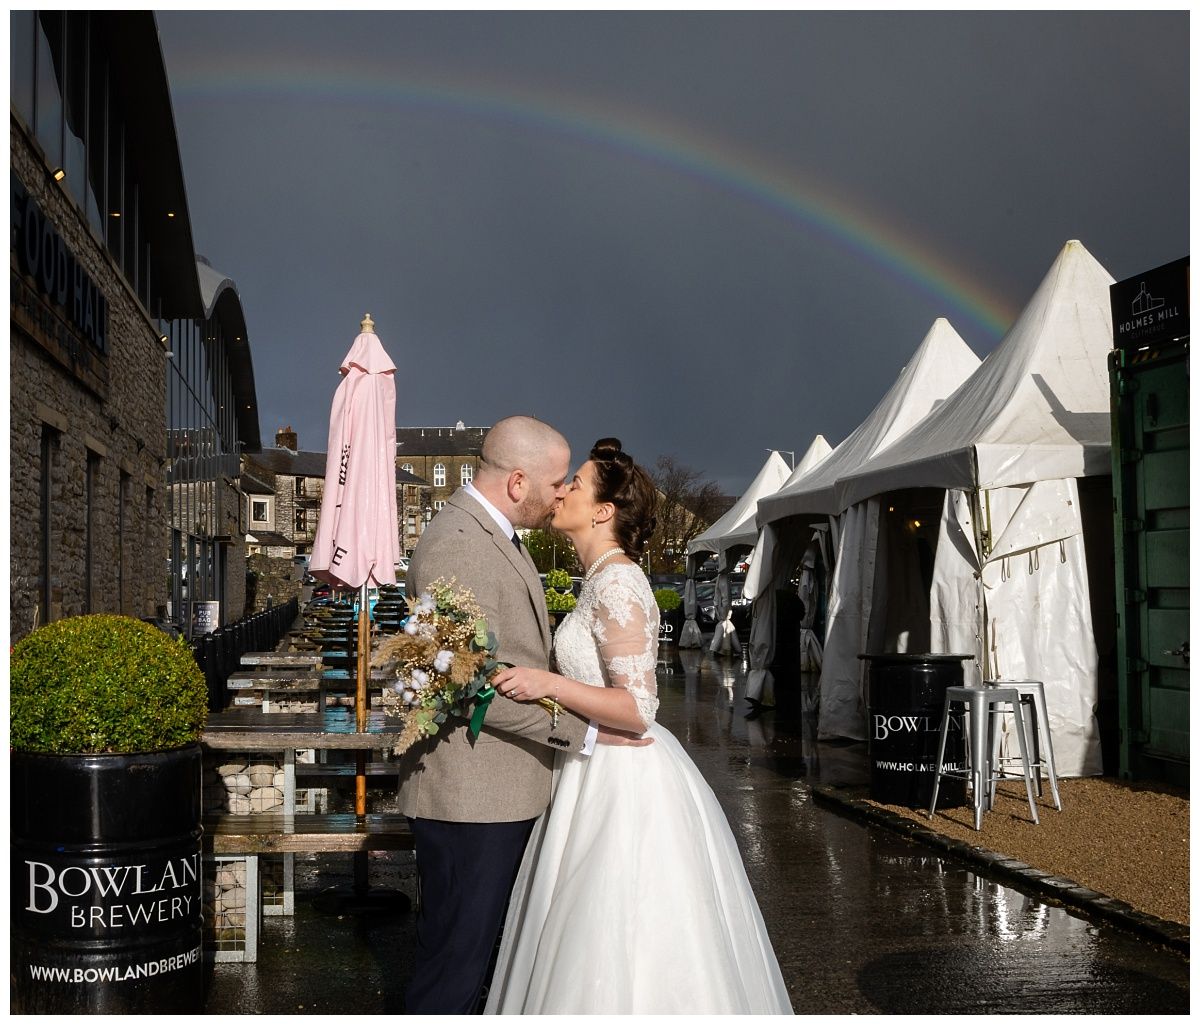 Rick Dell Photography - Toni And Trev’s Rainbow Holmes Mill Wedding Day